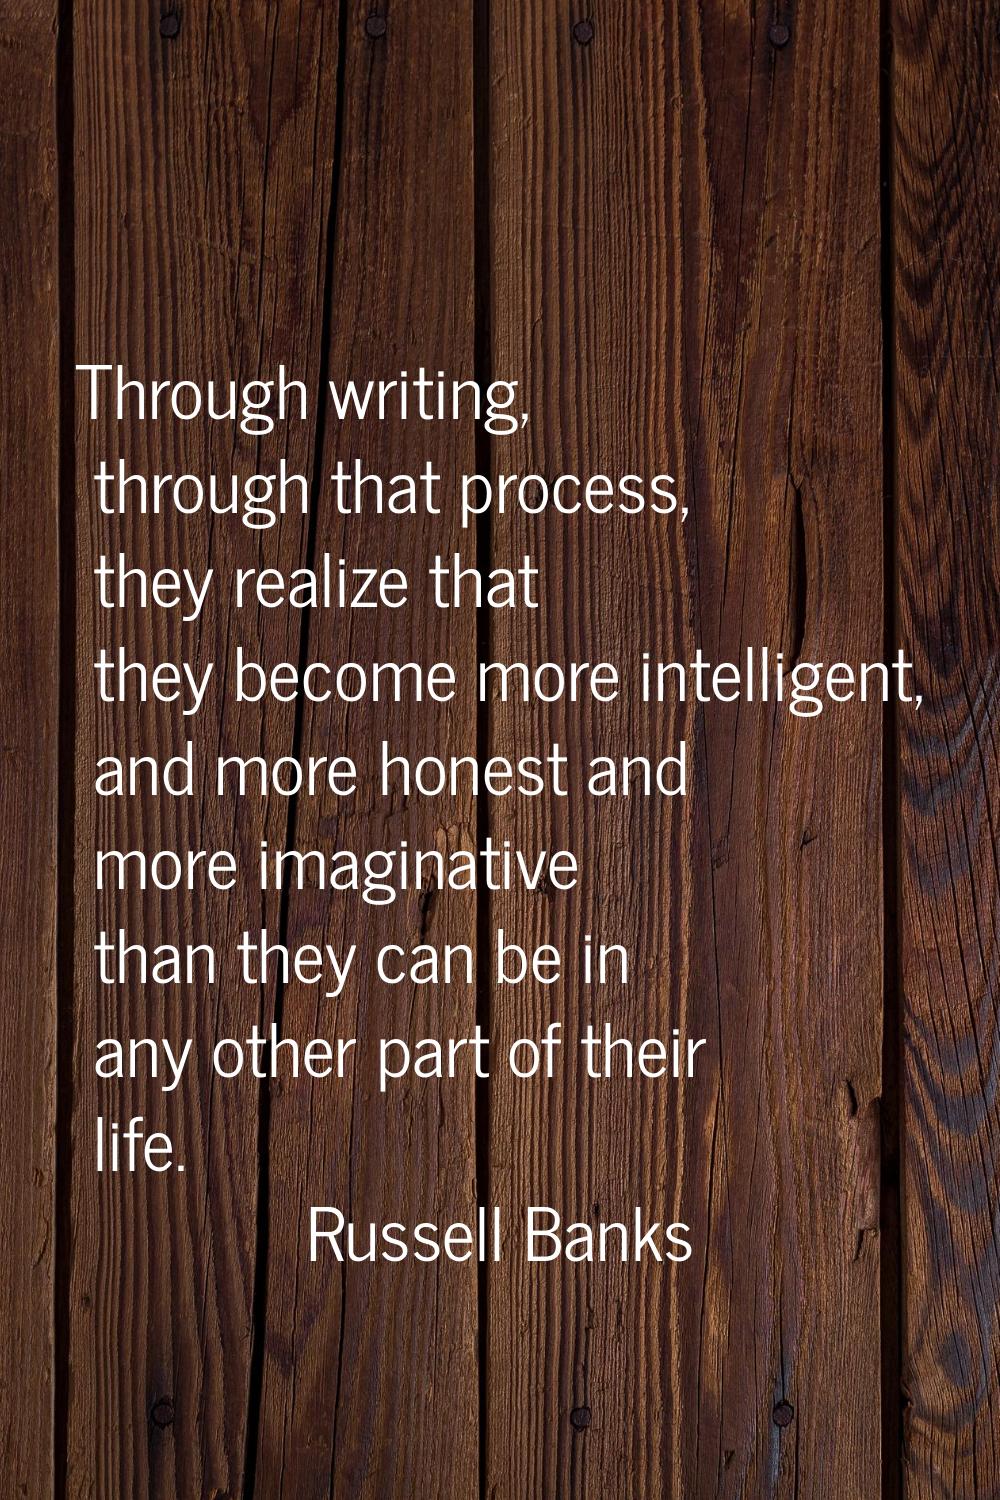 Through writing, through that process, they realize that they become more intelligent, and more hon